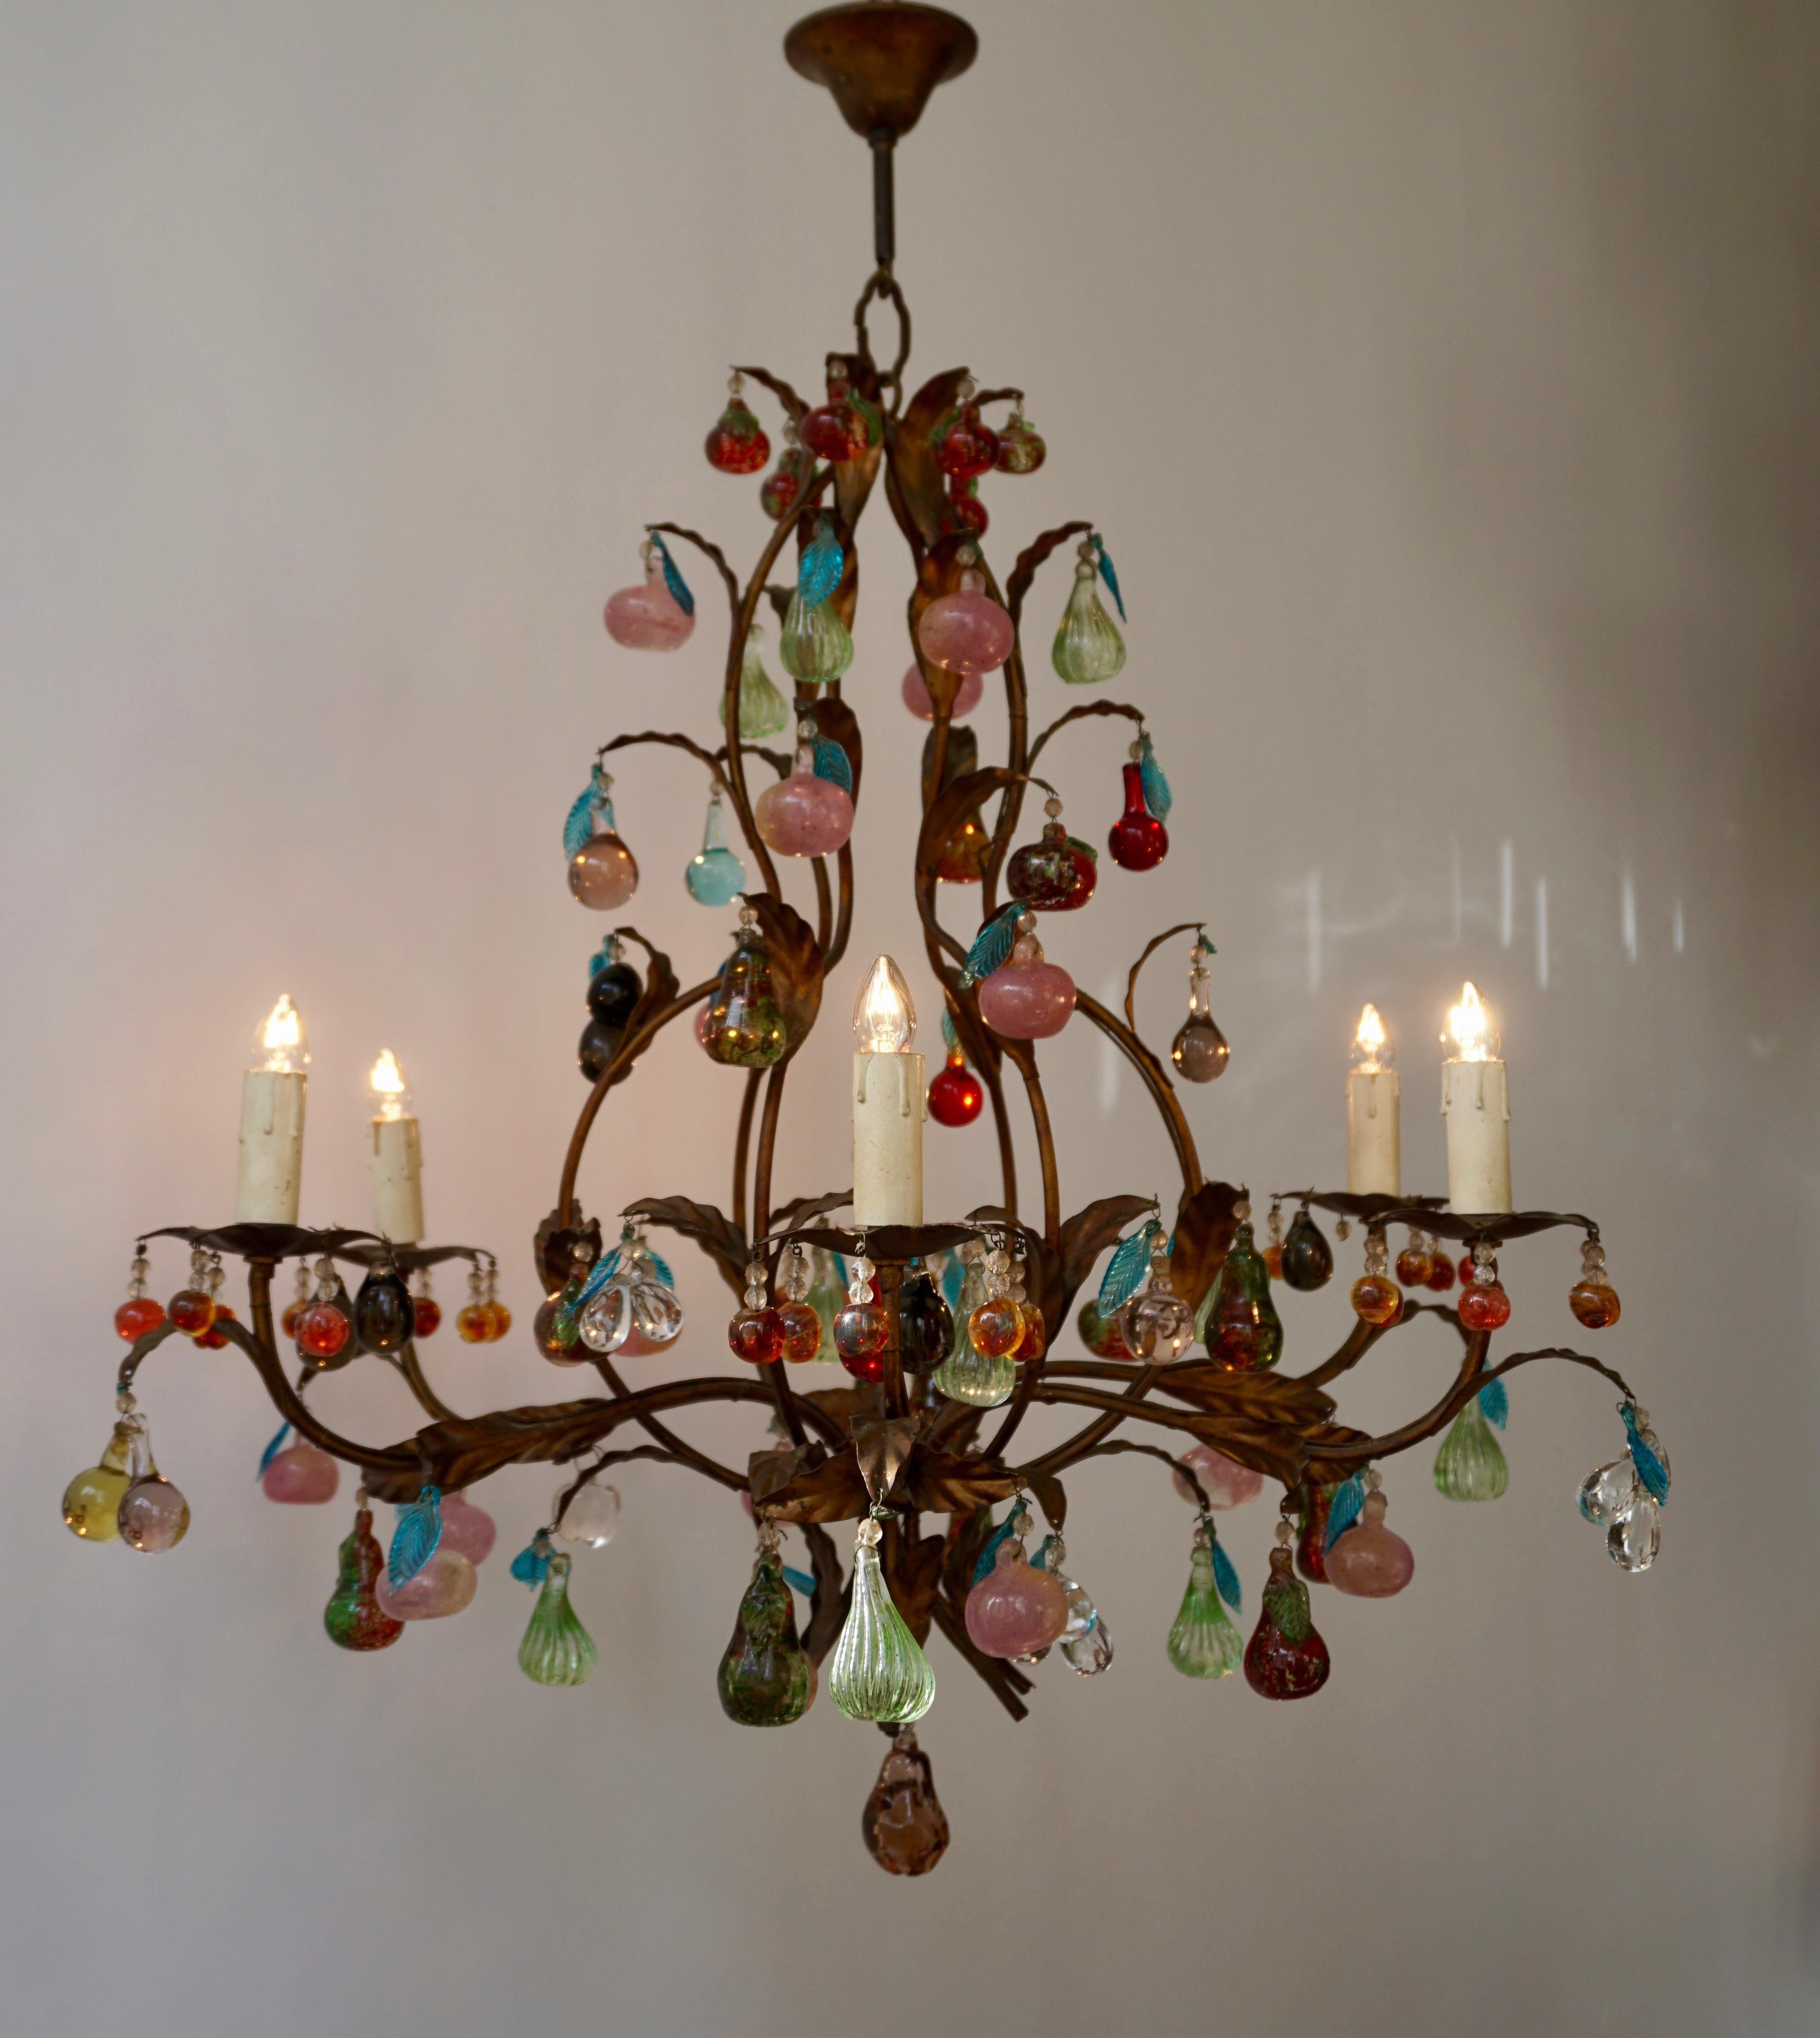 Brass Charming Italian Murano Chandelier with Fruit Pendants in Colored Glass